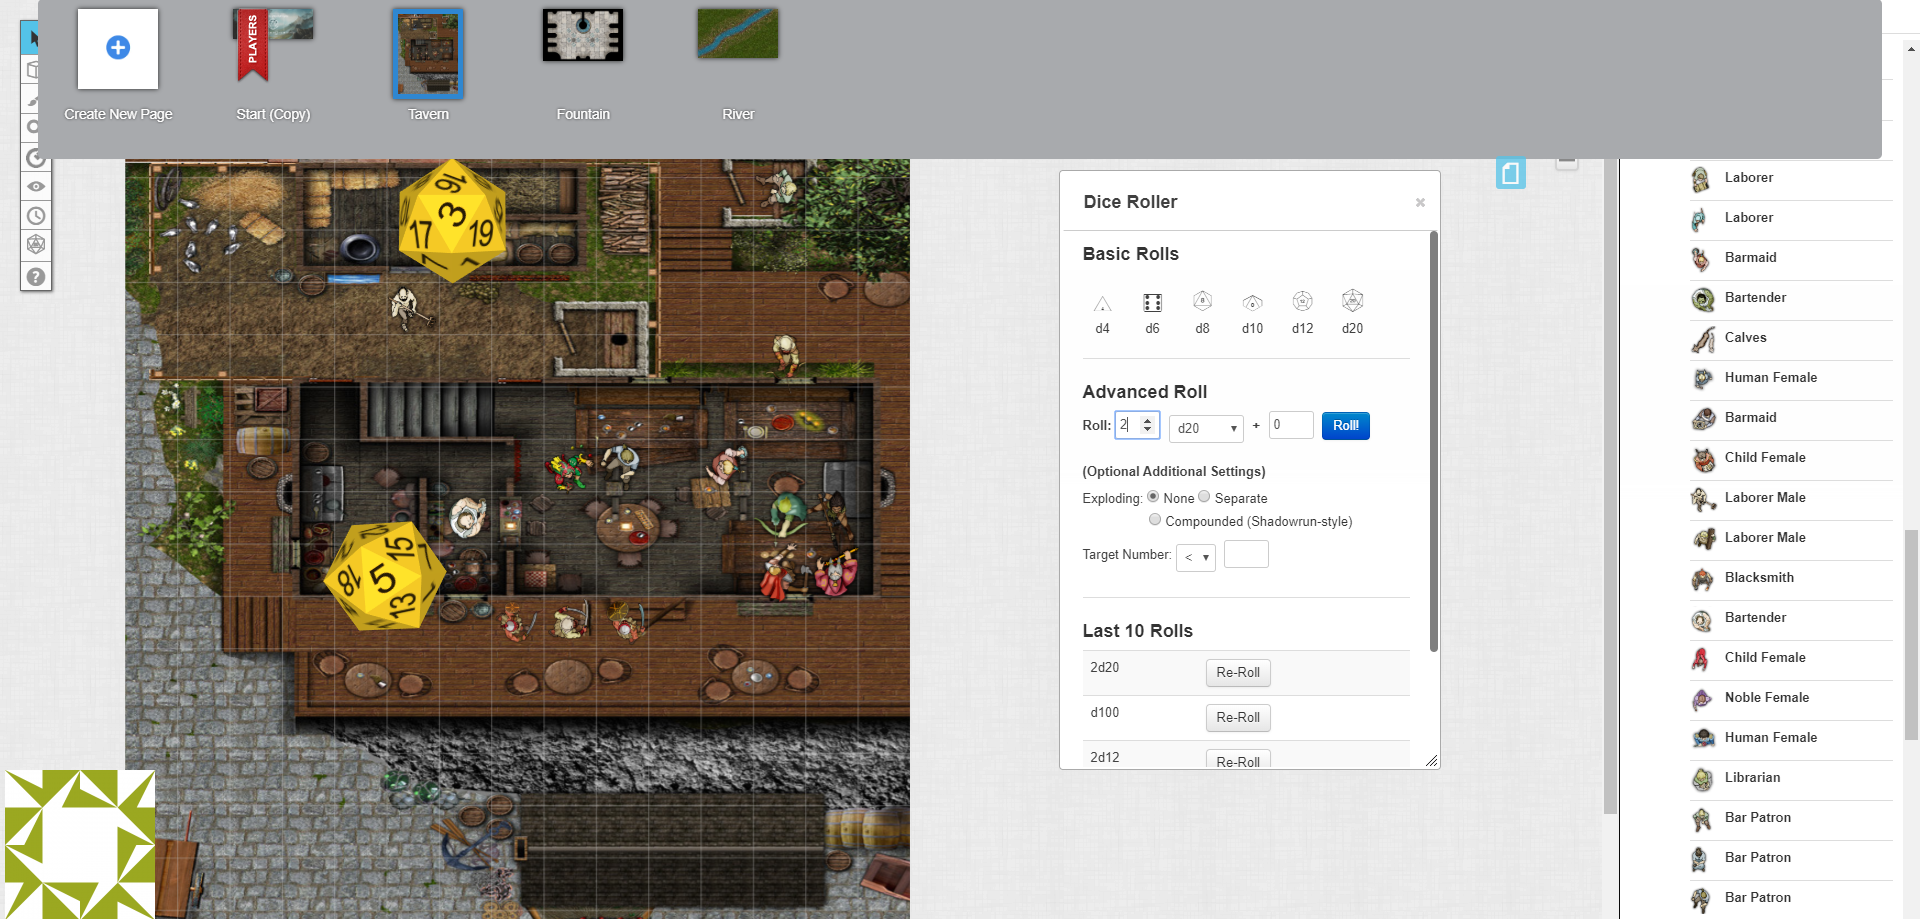 Roll20: Online virtual tabletop for pen and paper RPGs and board games